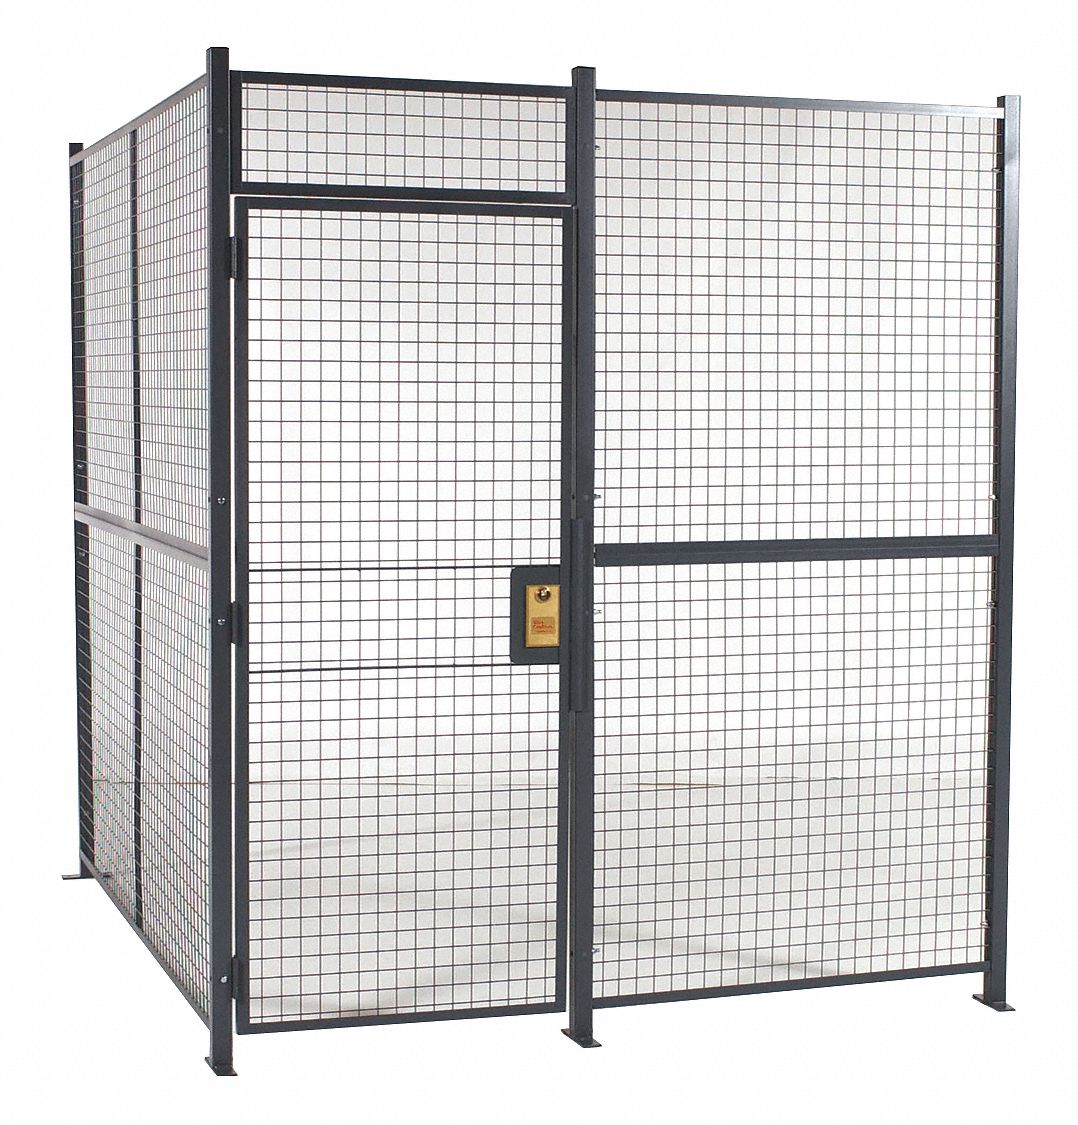 Welded Partition Cage: 10 ft x 10 ft 8 ft, Gray, 3 Sides, Powder-Coated, 10 ft x 10 ft